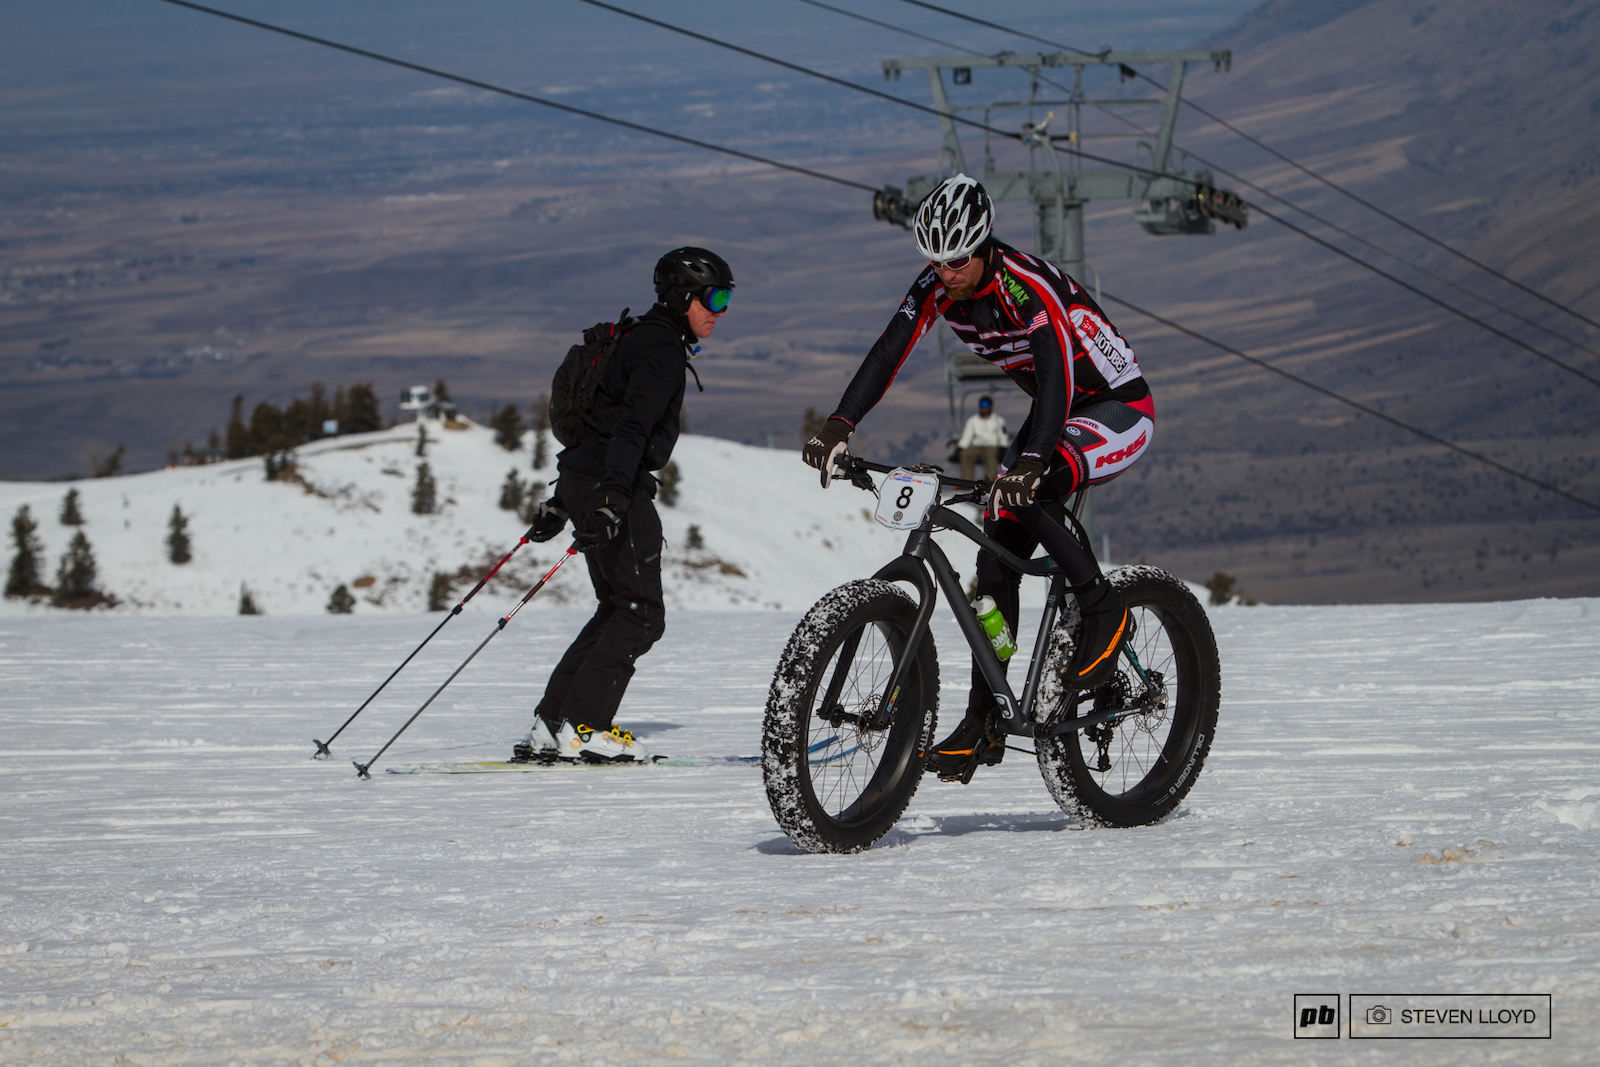 Skiers and bikers shareing the slopes.